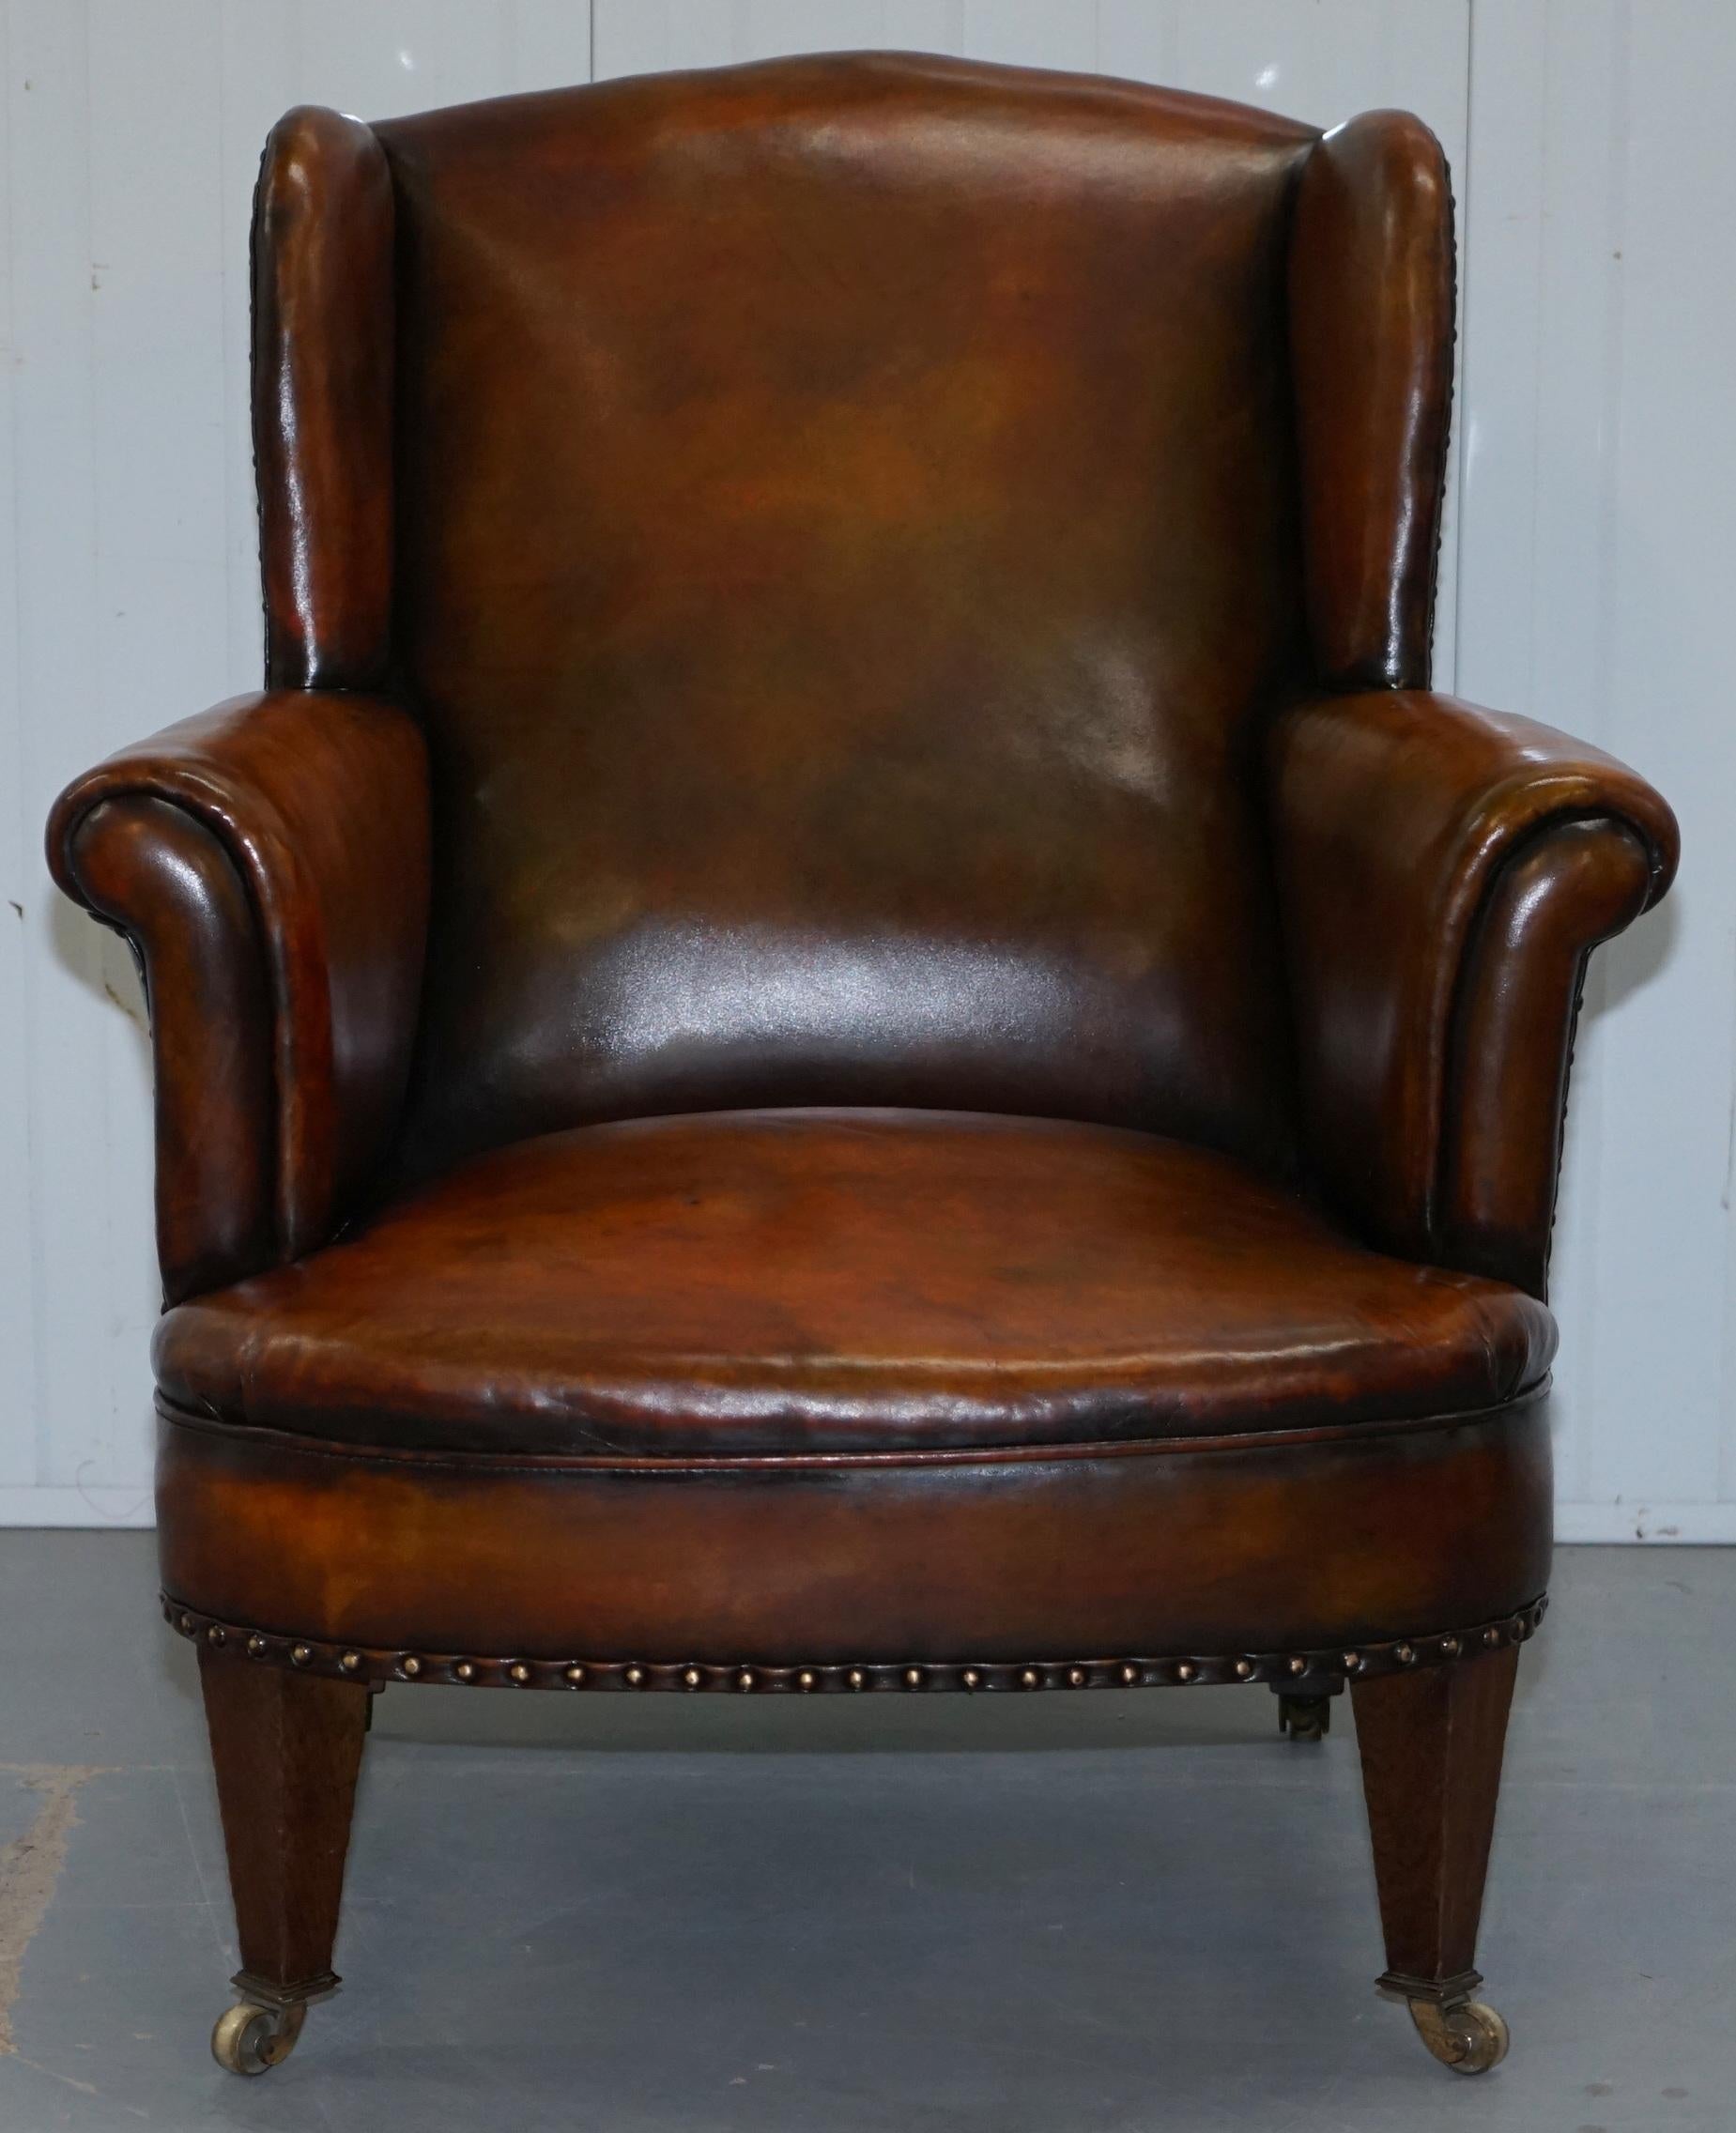 We are delighted to offer for sale this very rare original Hampton & Son’s Pall Mall Victorian circa 1870 fully restored hand dyed leather wingback armchair 

A very good looking well made solid oak framed armchair with original fully restored